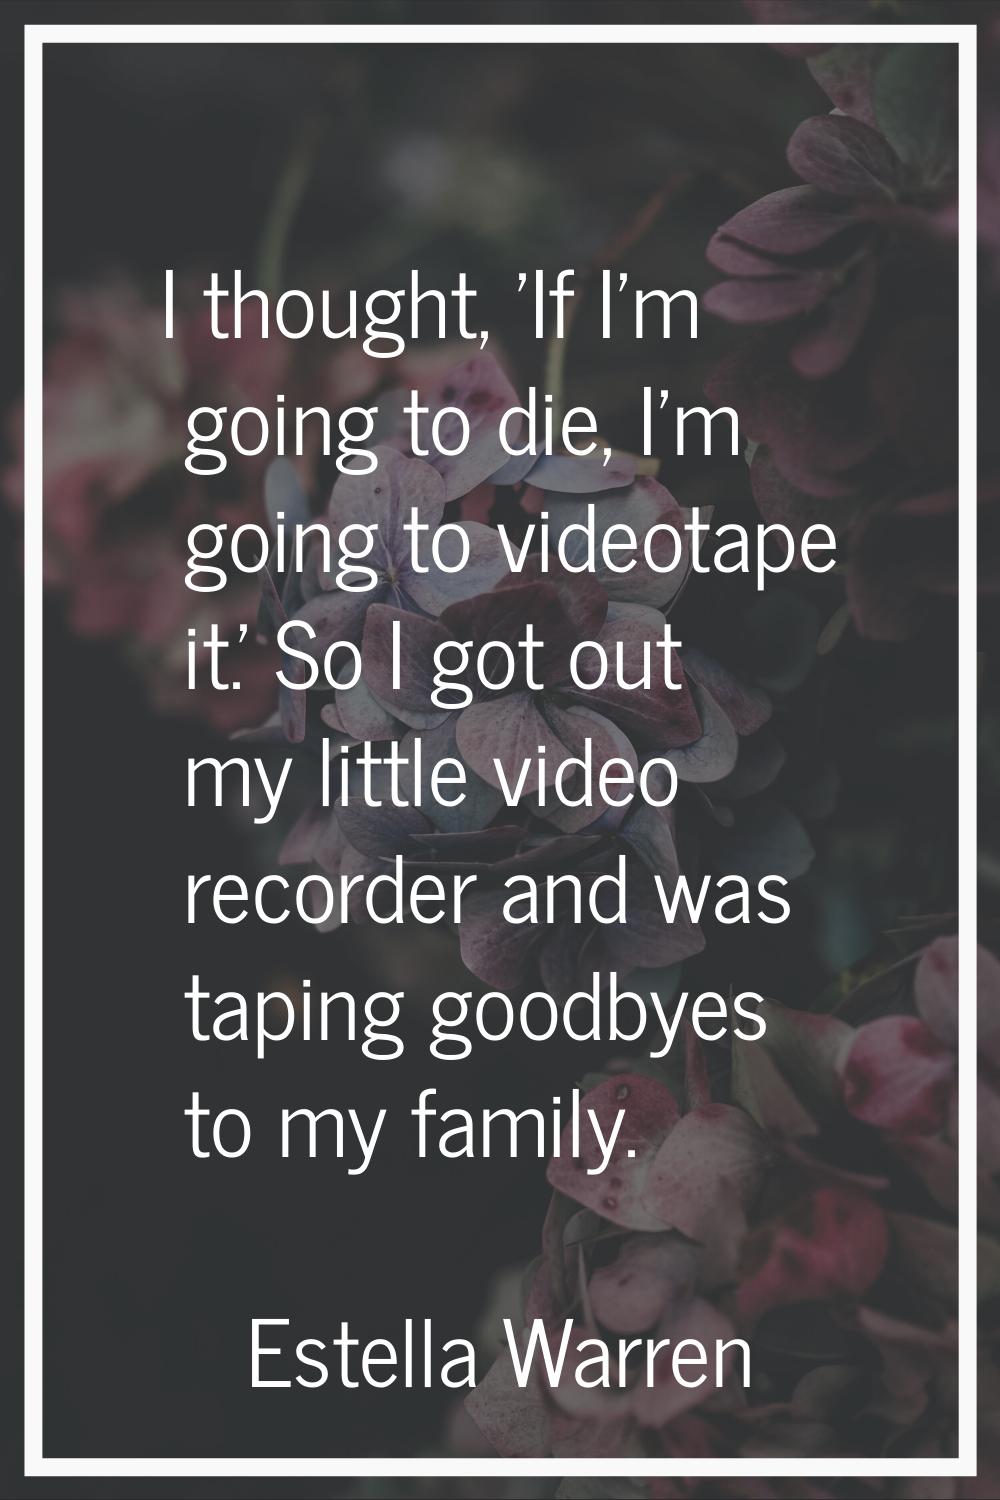 I thought, 'If I'm going to die, I'm going to videotape it.' So I got out my little video recorder 